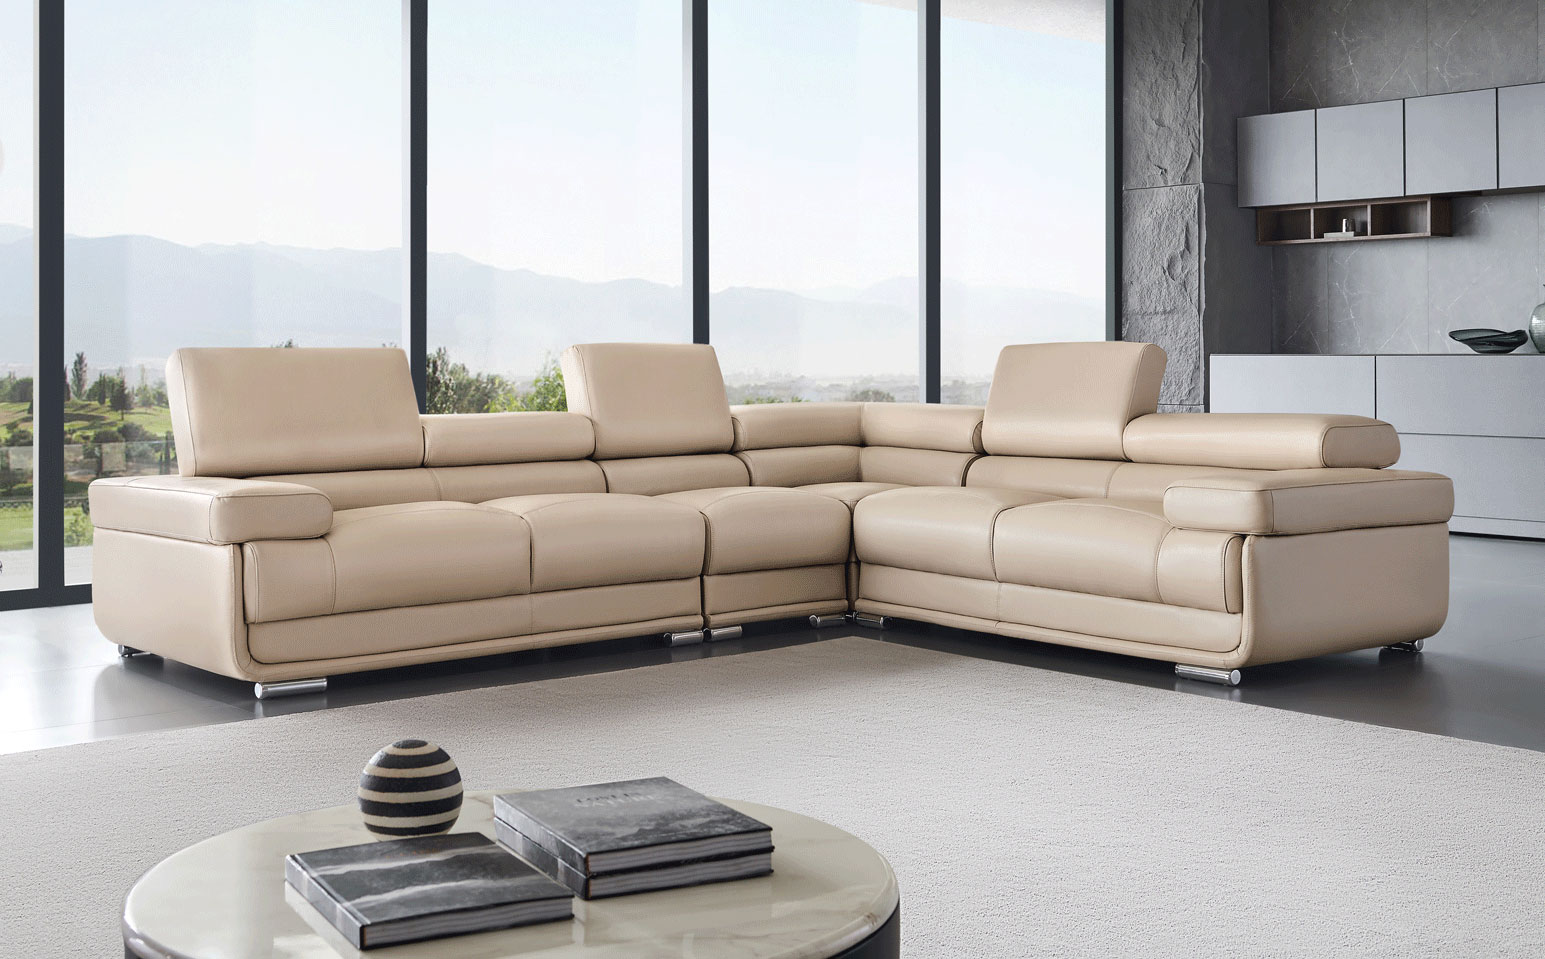 Living Room Furniture Sofas Loveseats and Chairs 2119 Sectional Cream